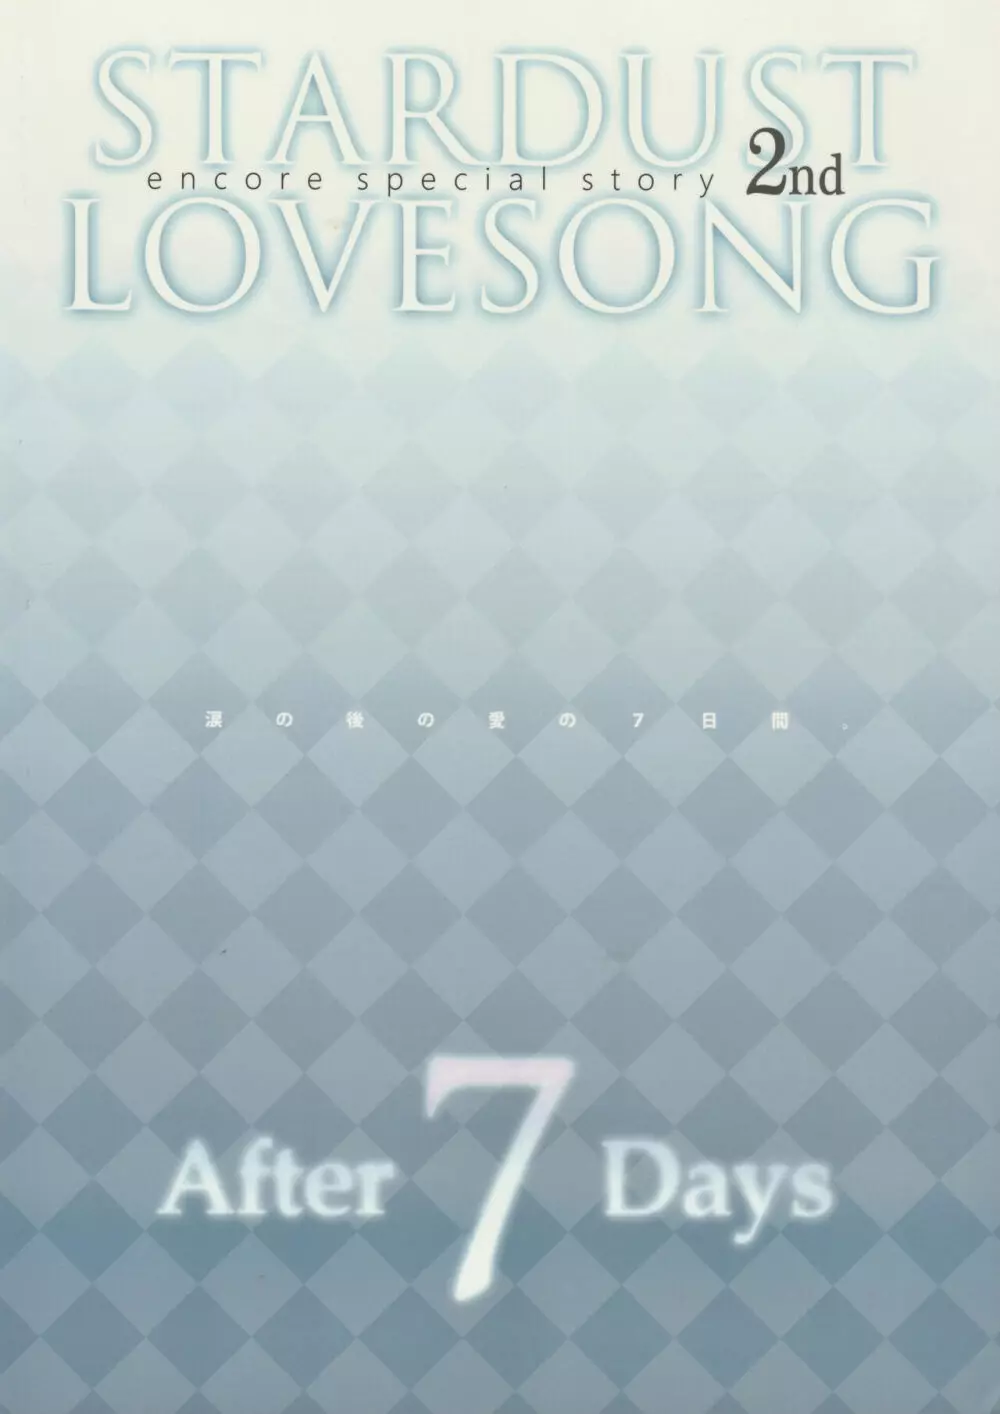 STARDUST LOVESONG encore special story 2nd After 7 Days 2nd Page.46